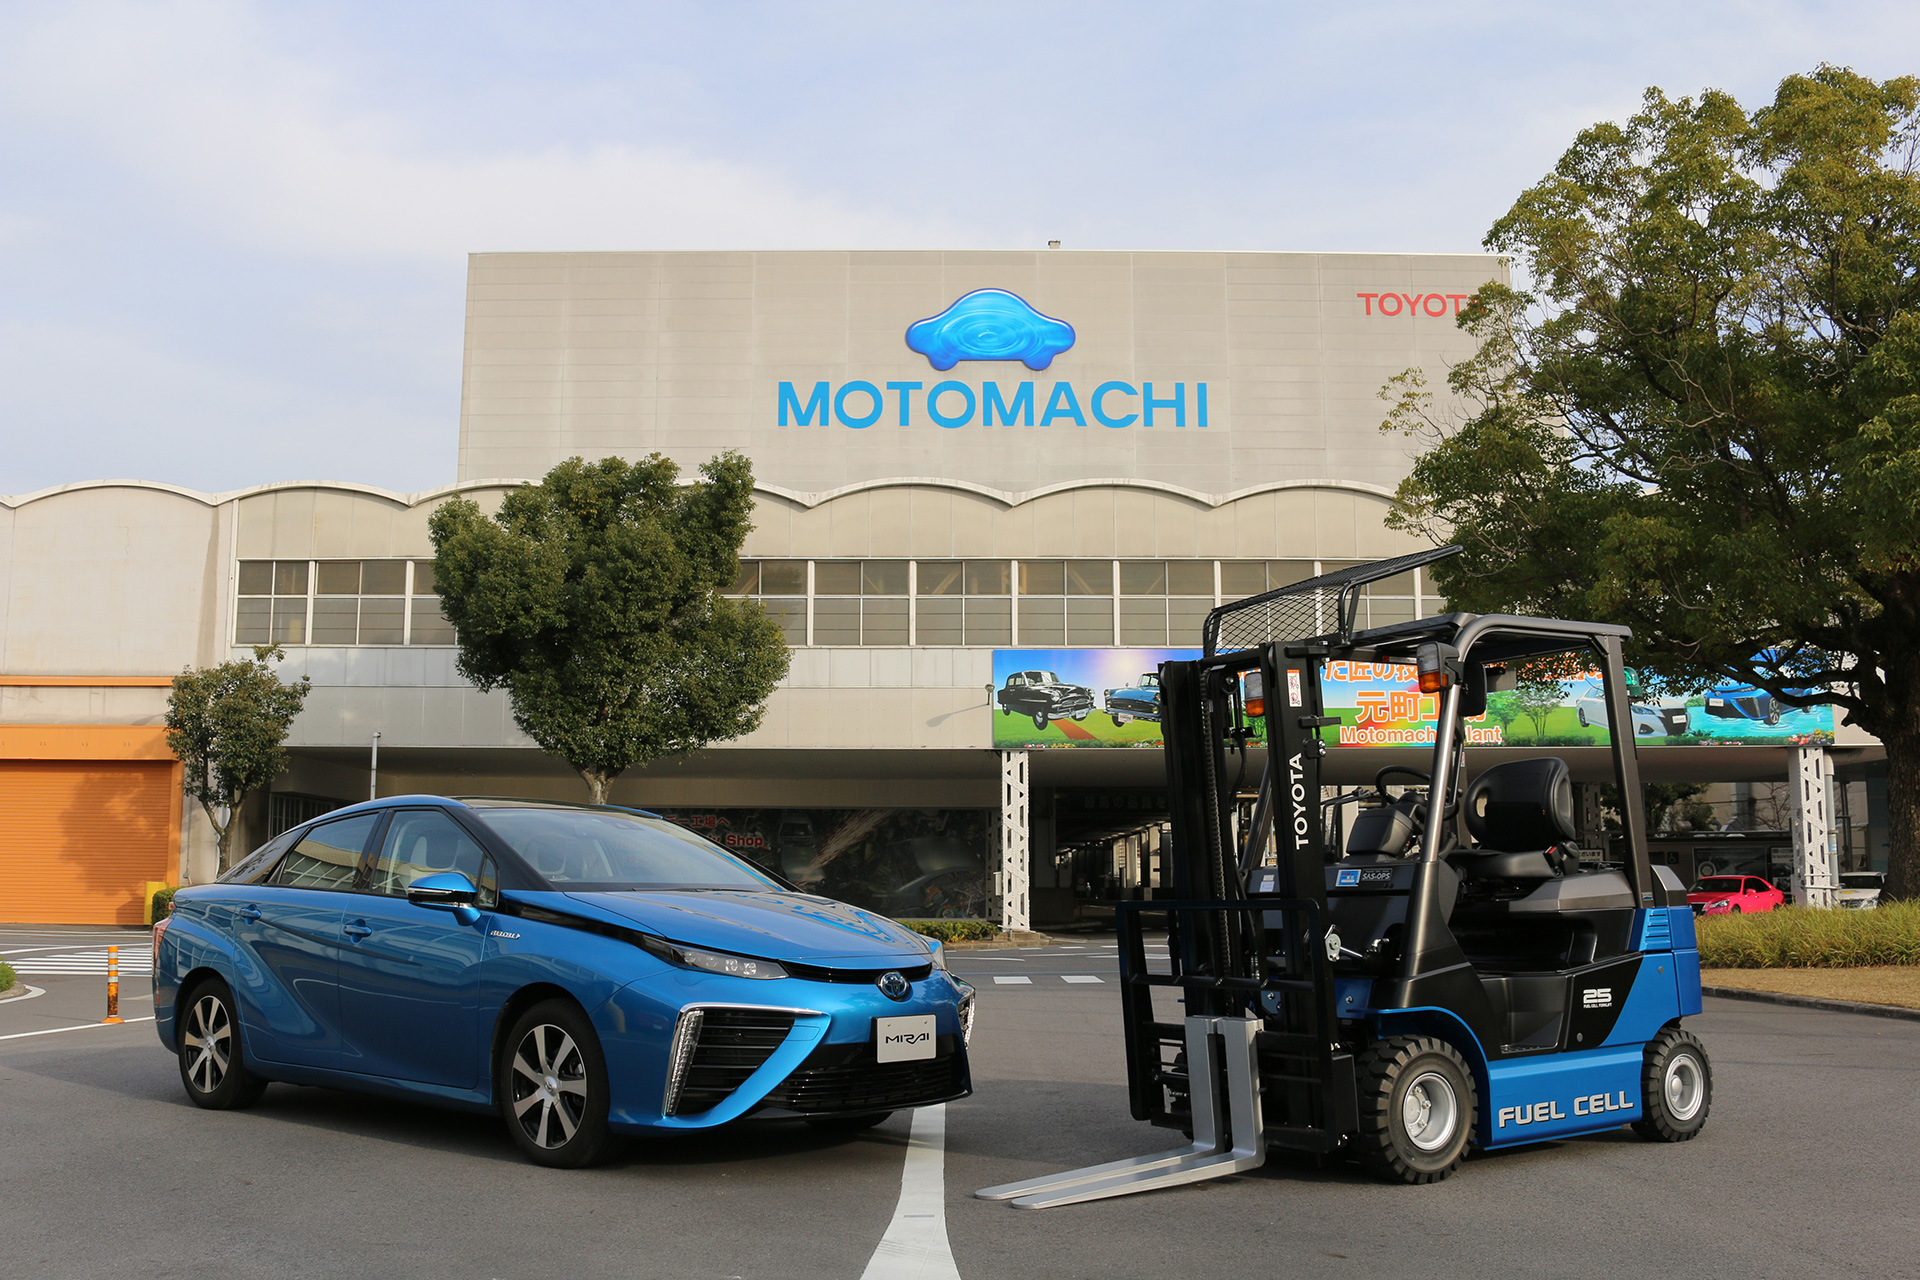 Mirai and Fuel cell forklift